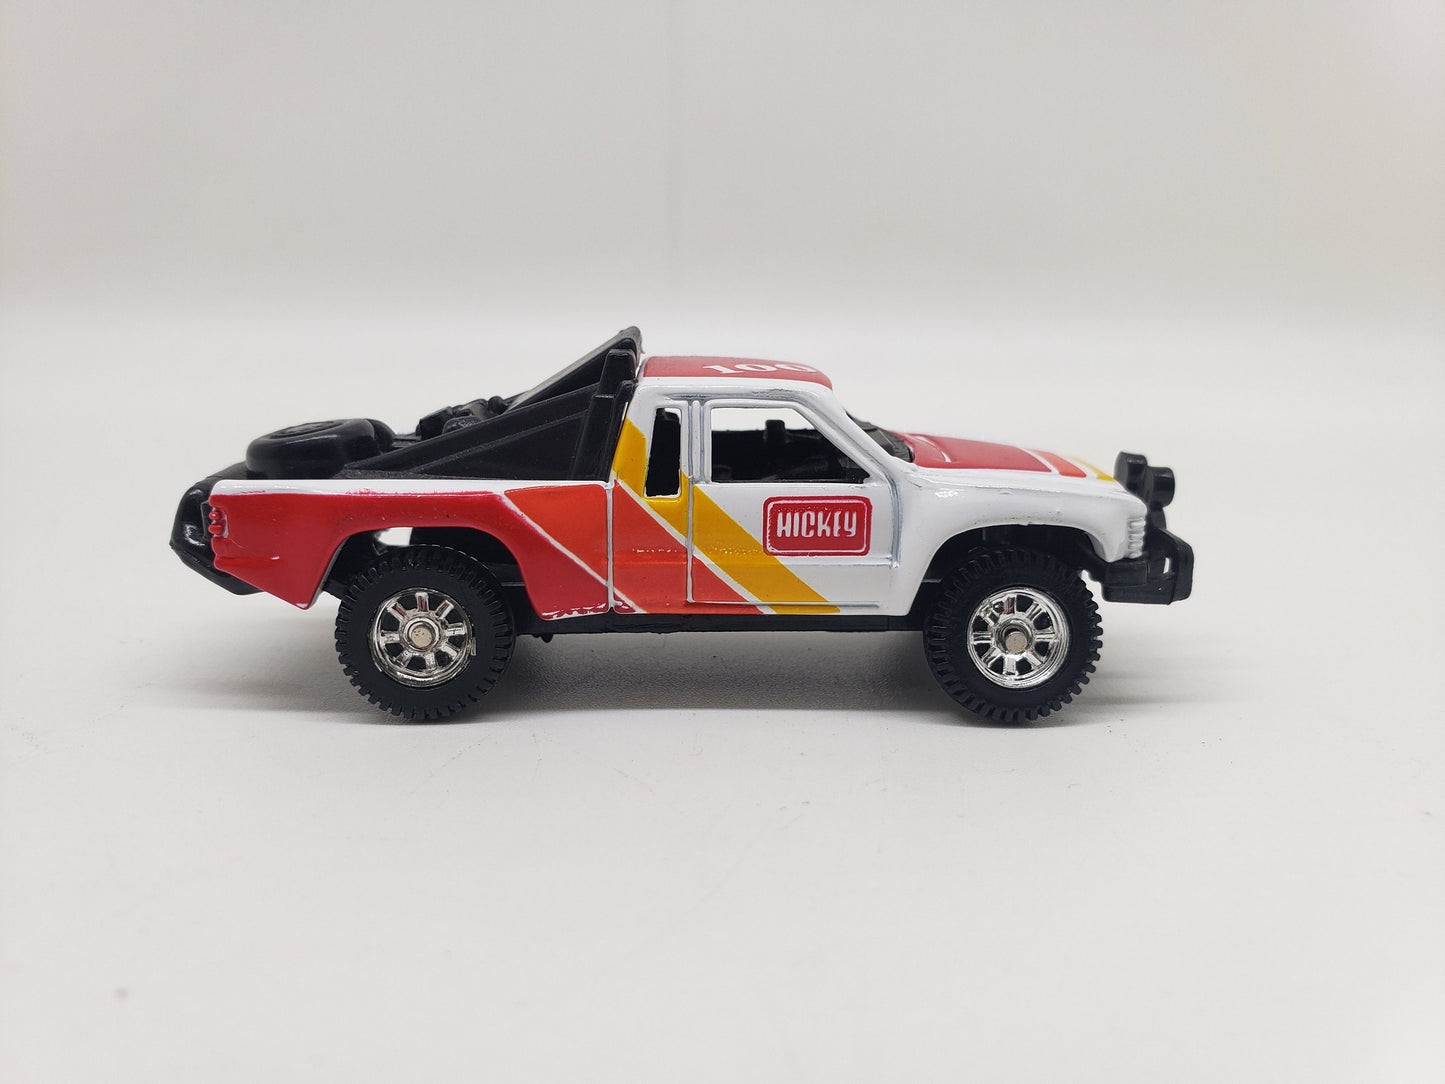 Maisto Toyota SR5 Off Road Truck White Vintage Collectable Scale Model Miniature Toy Car Perfect Birthday Gift